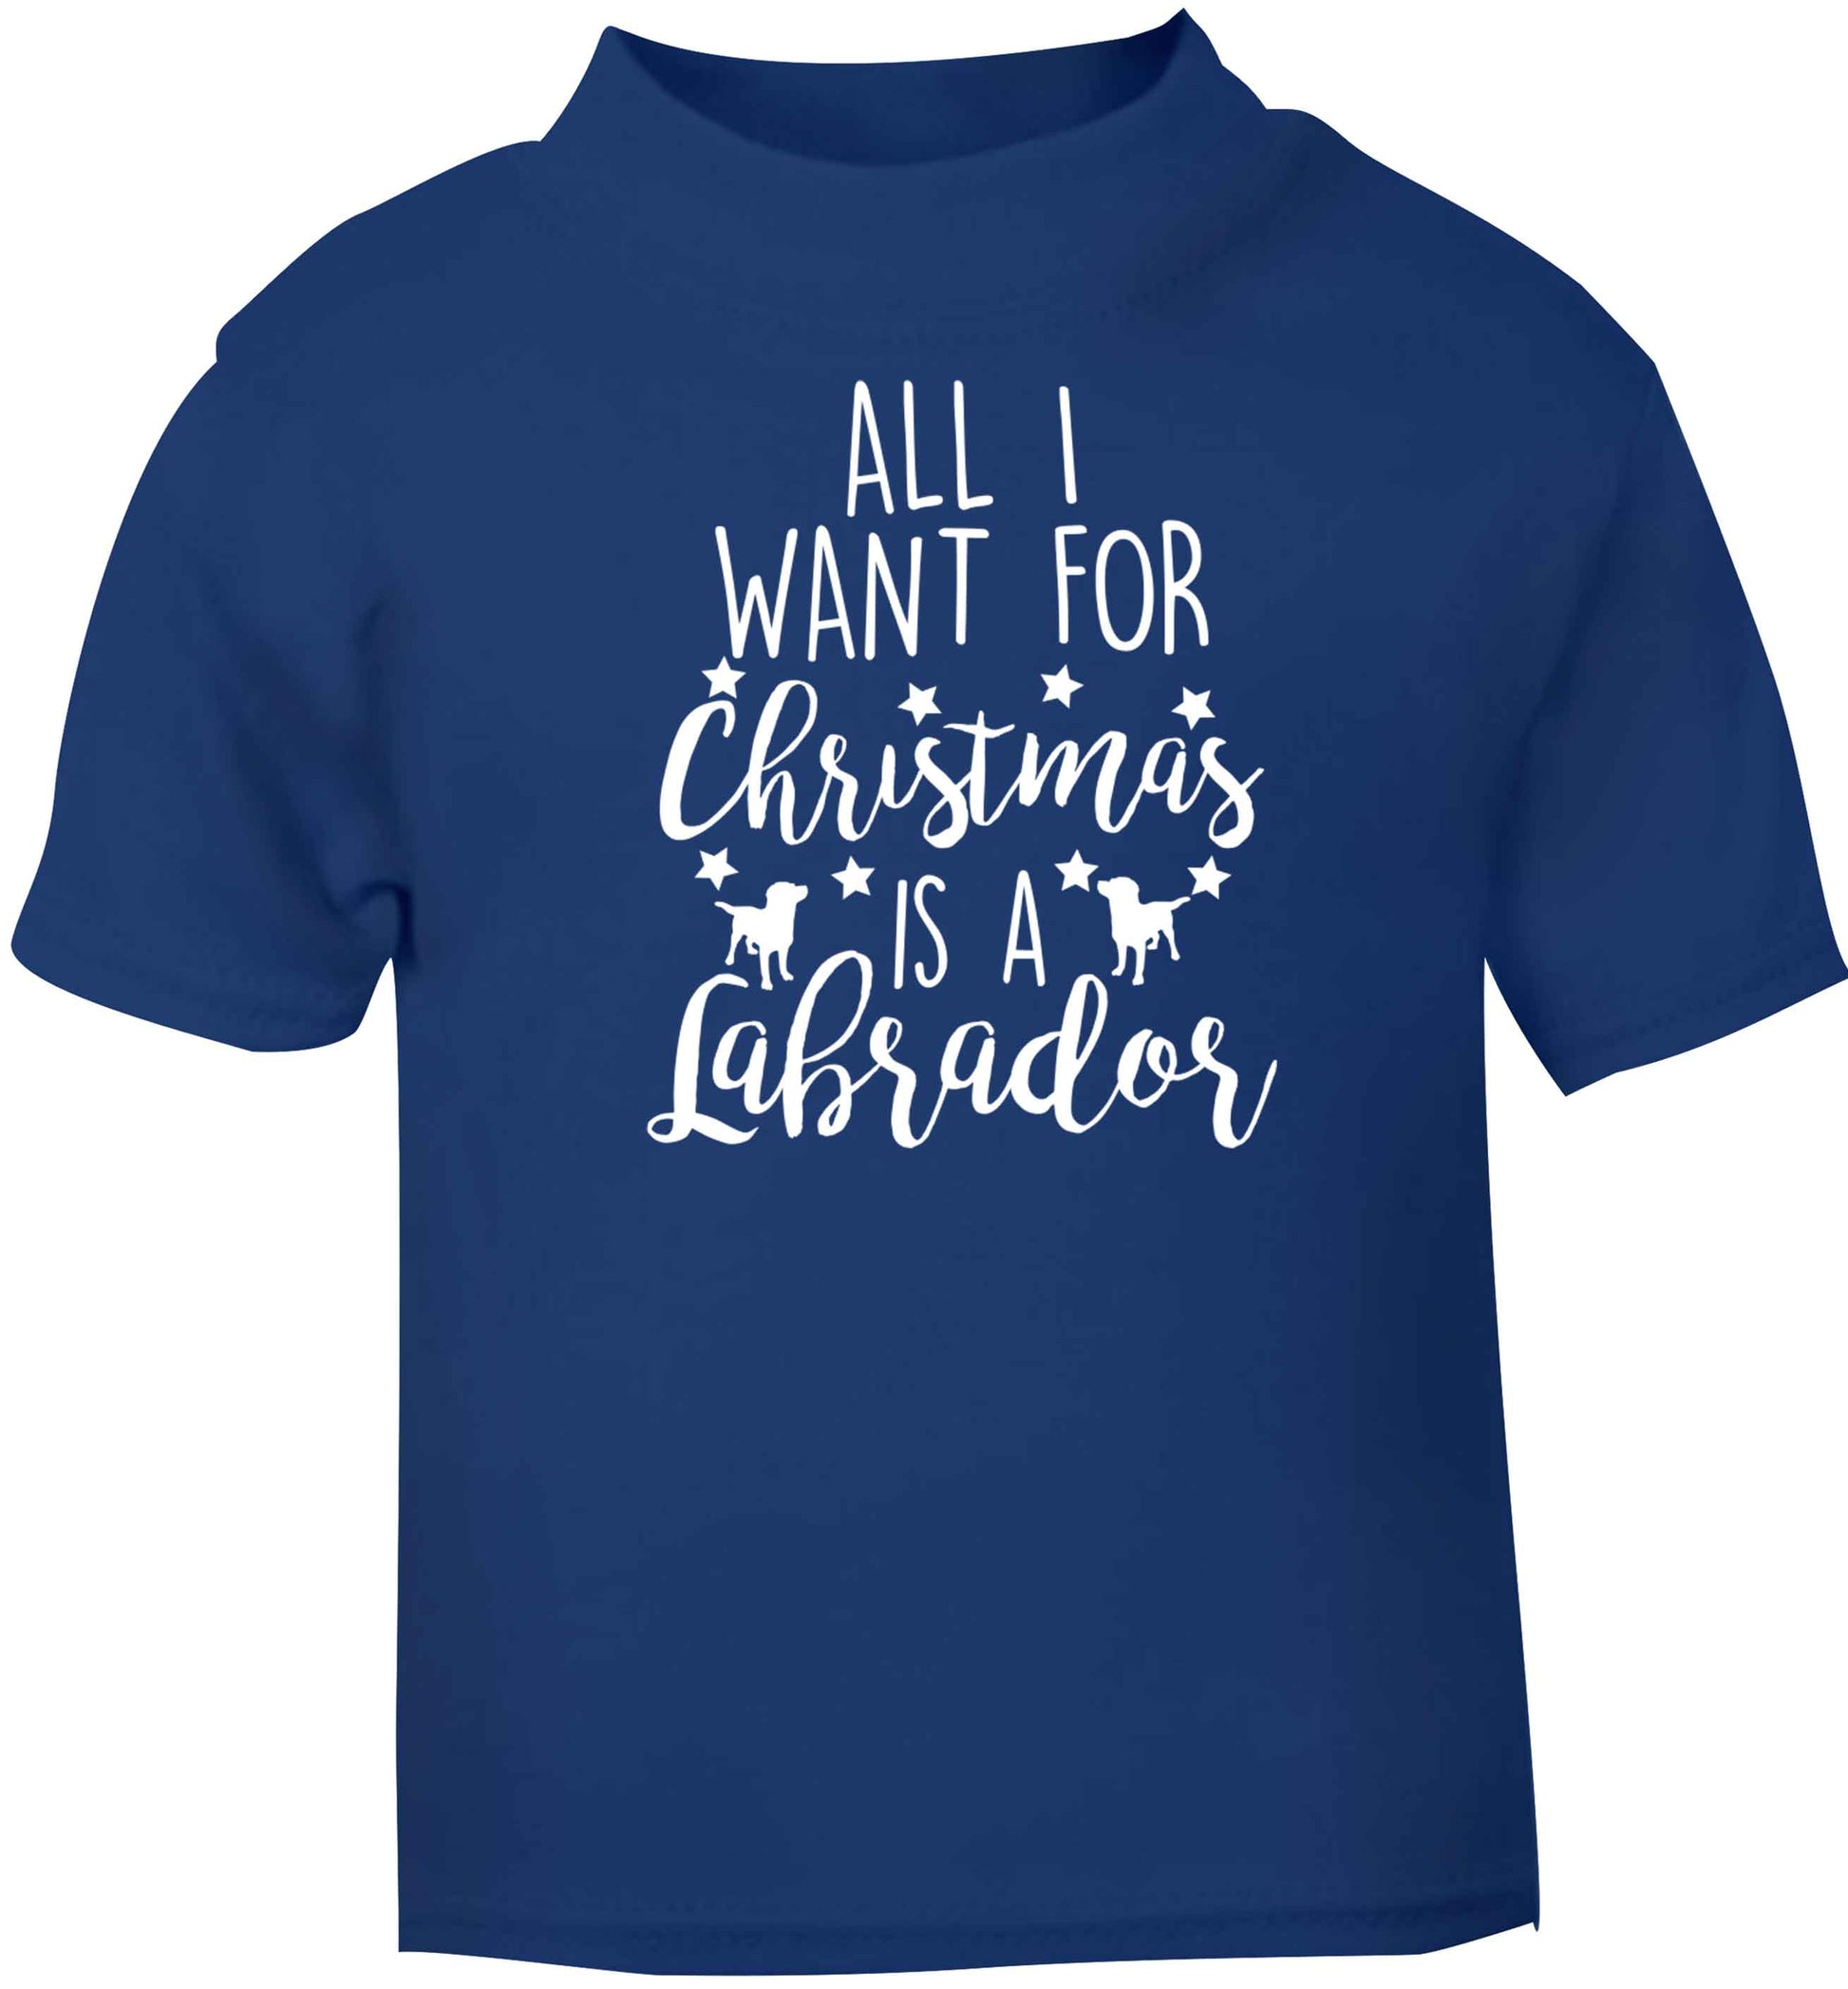 All I want for Christmas is a labrador blue baby toddler Tshirt 2 Years